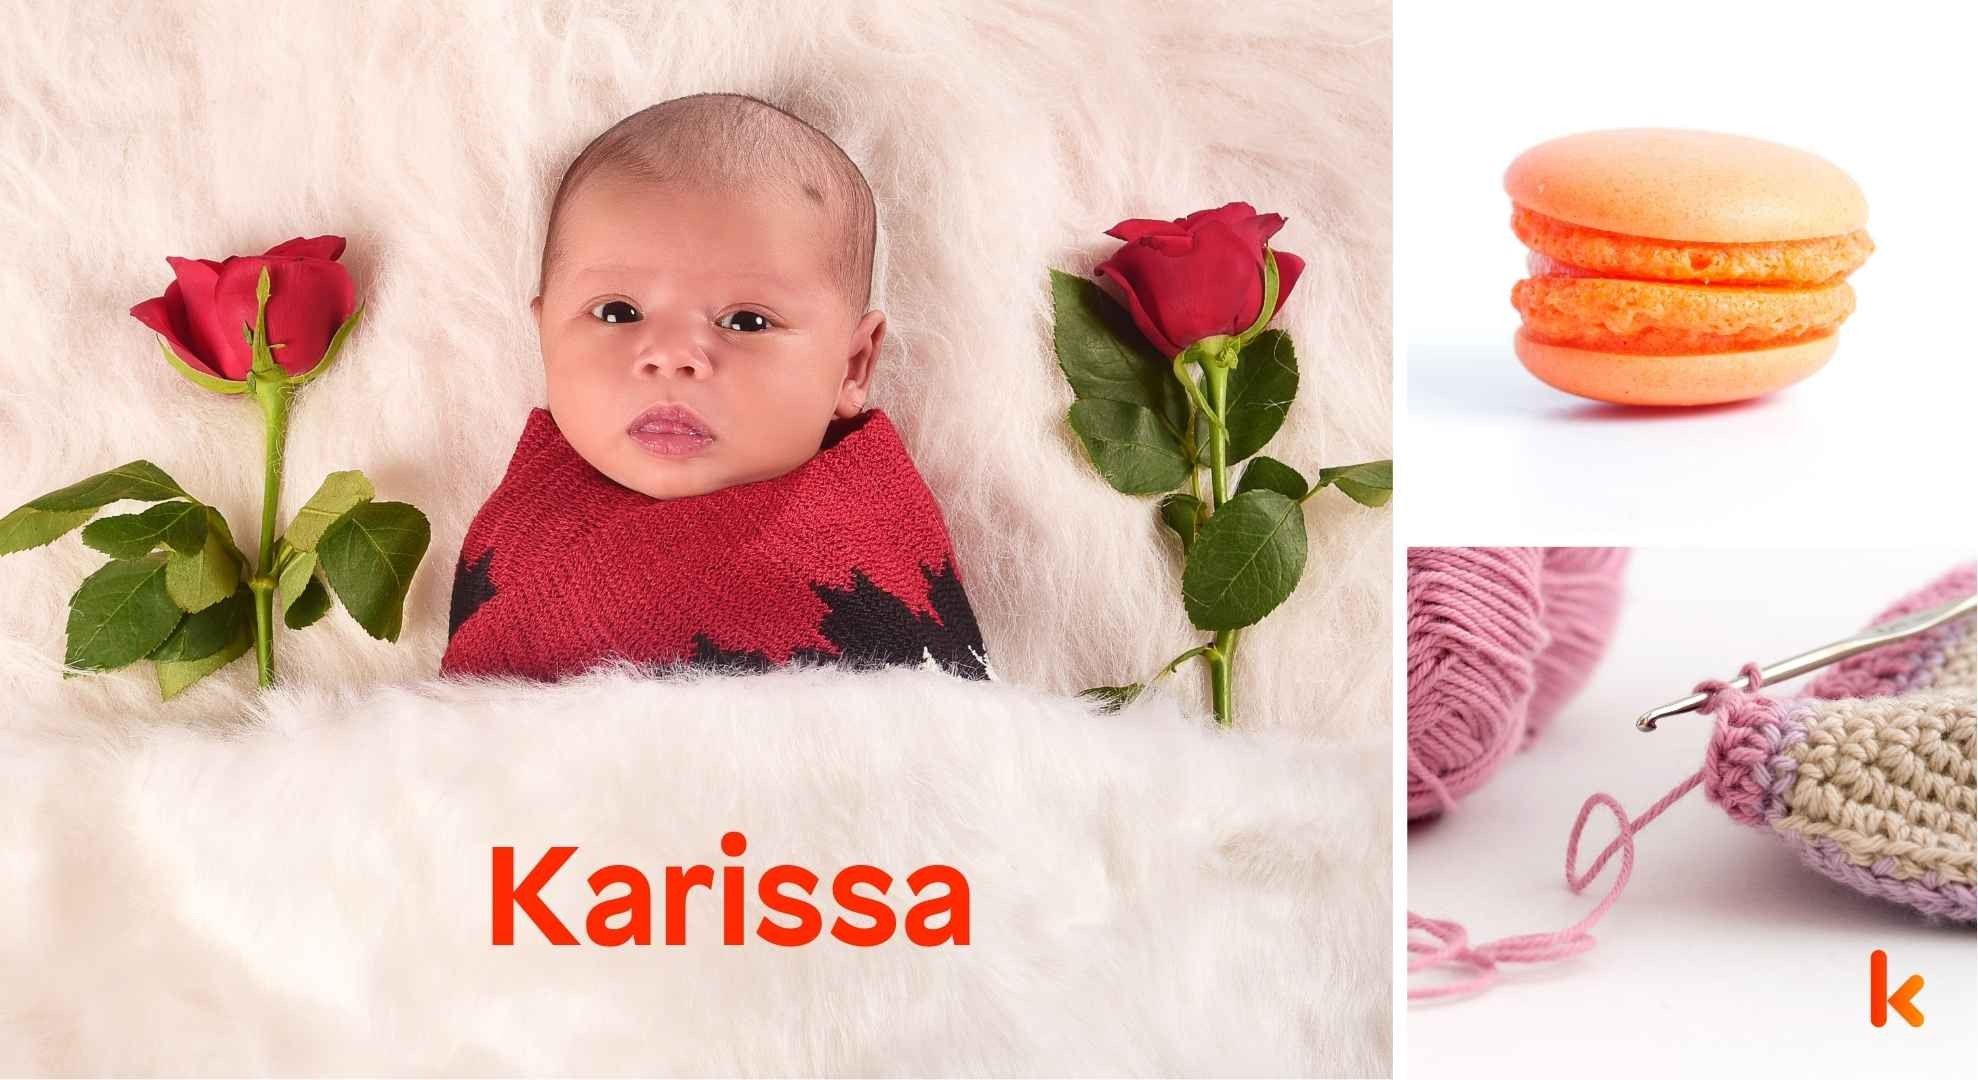 Meaning of the name Karissa